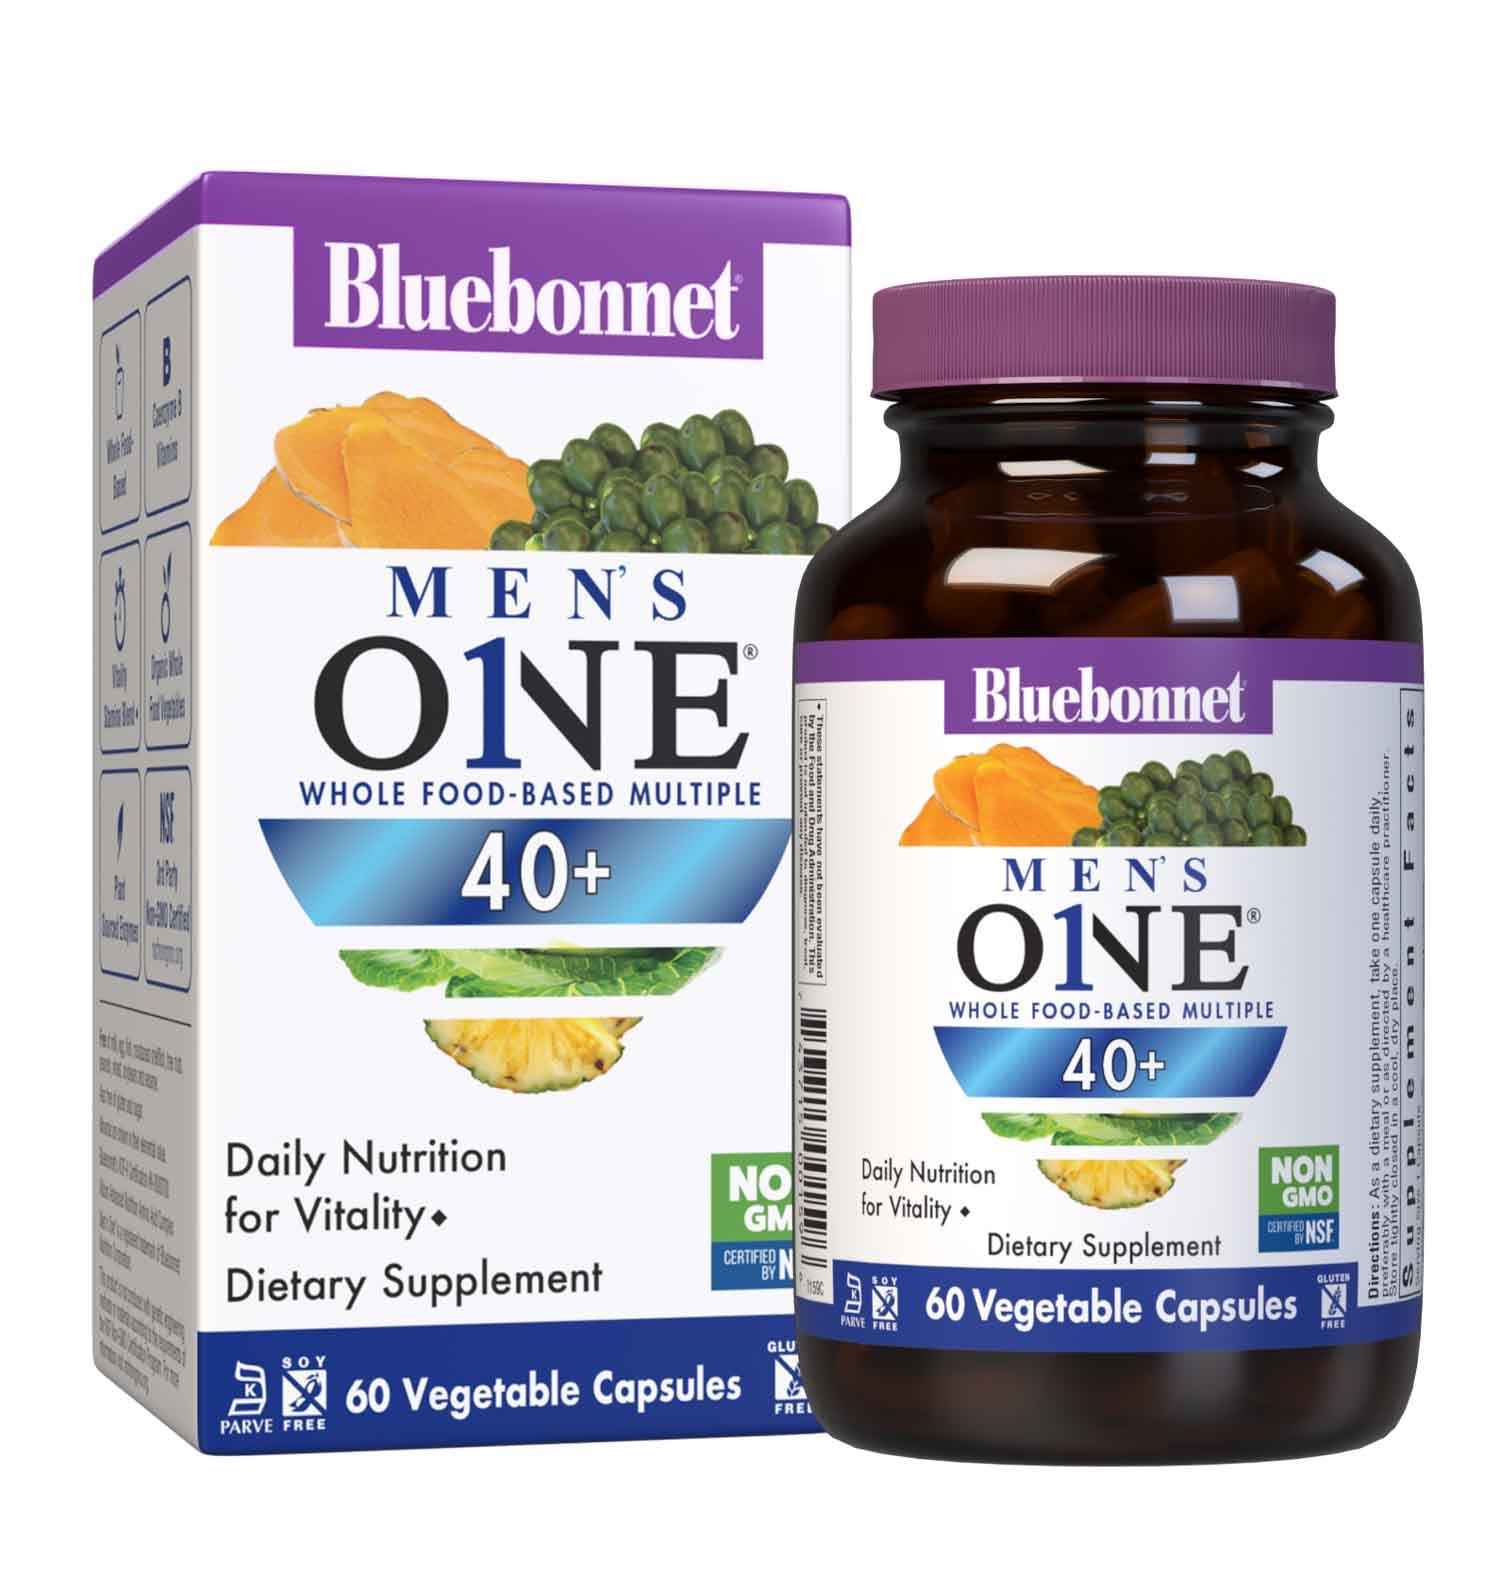 Bluebonnet’s Men’s ONE 40+ Whole Food-Based Multiple 60 Vegetable Capsules are formulated for daily nutritional support and vitality for men over 40, helping to increase energy and vitality, aid joint comfort, maintain prostate health, and support heart health. Bottle with box. #size_60 count